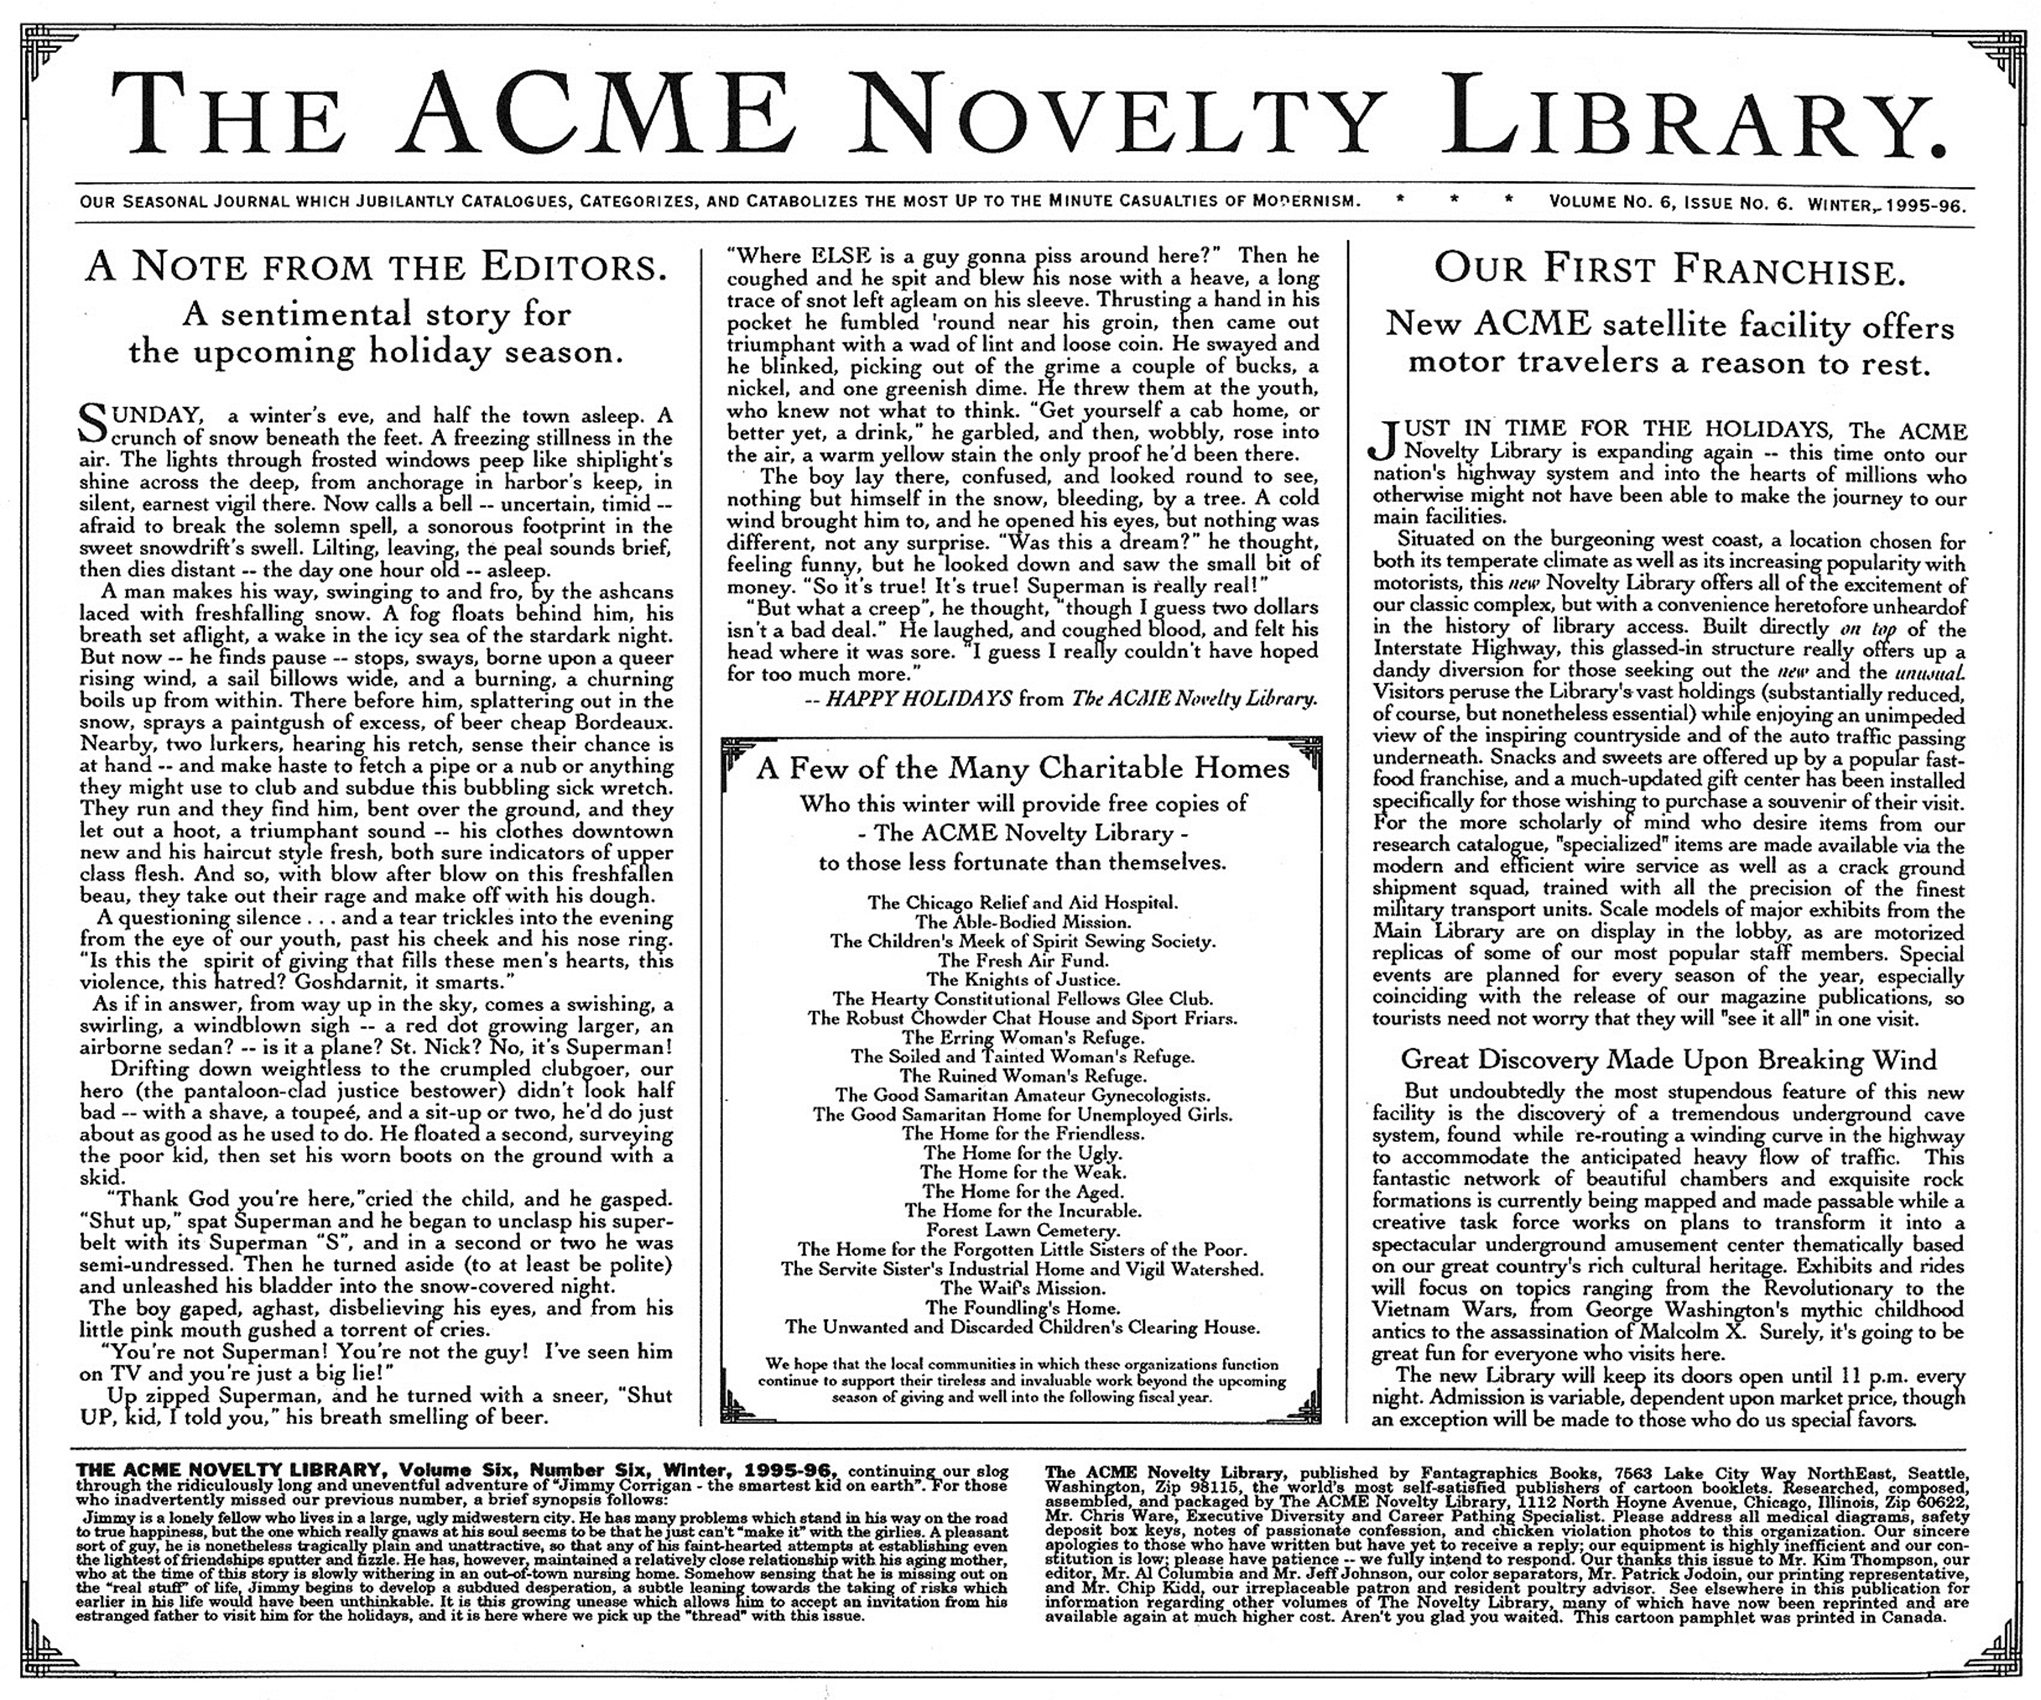 Read online The Acme Novelty Library comic -  Issue #6 - 2